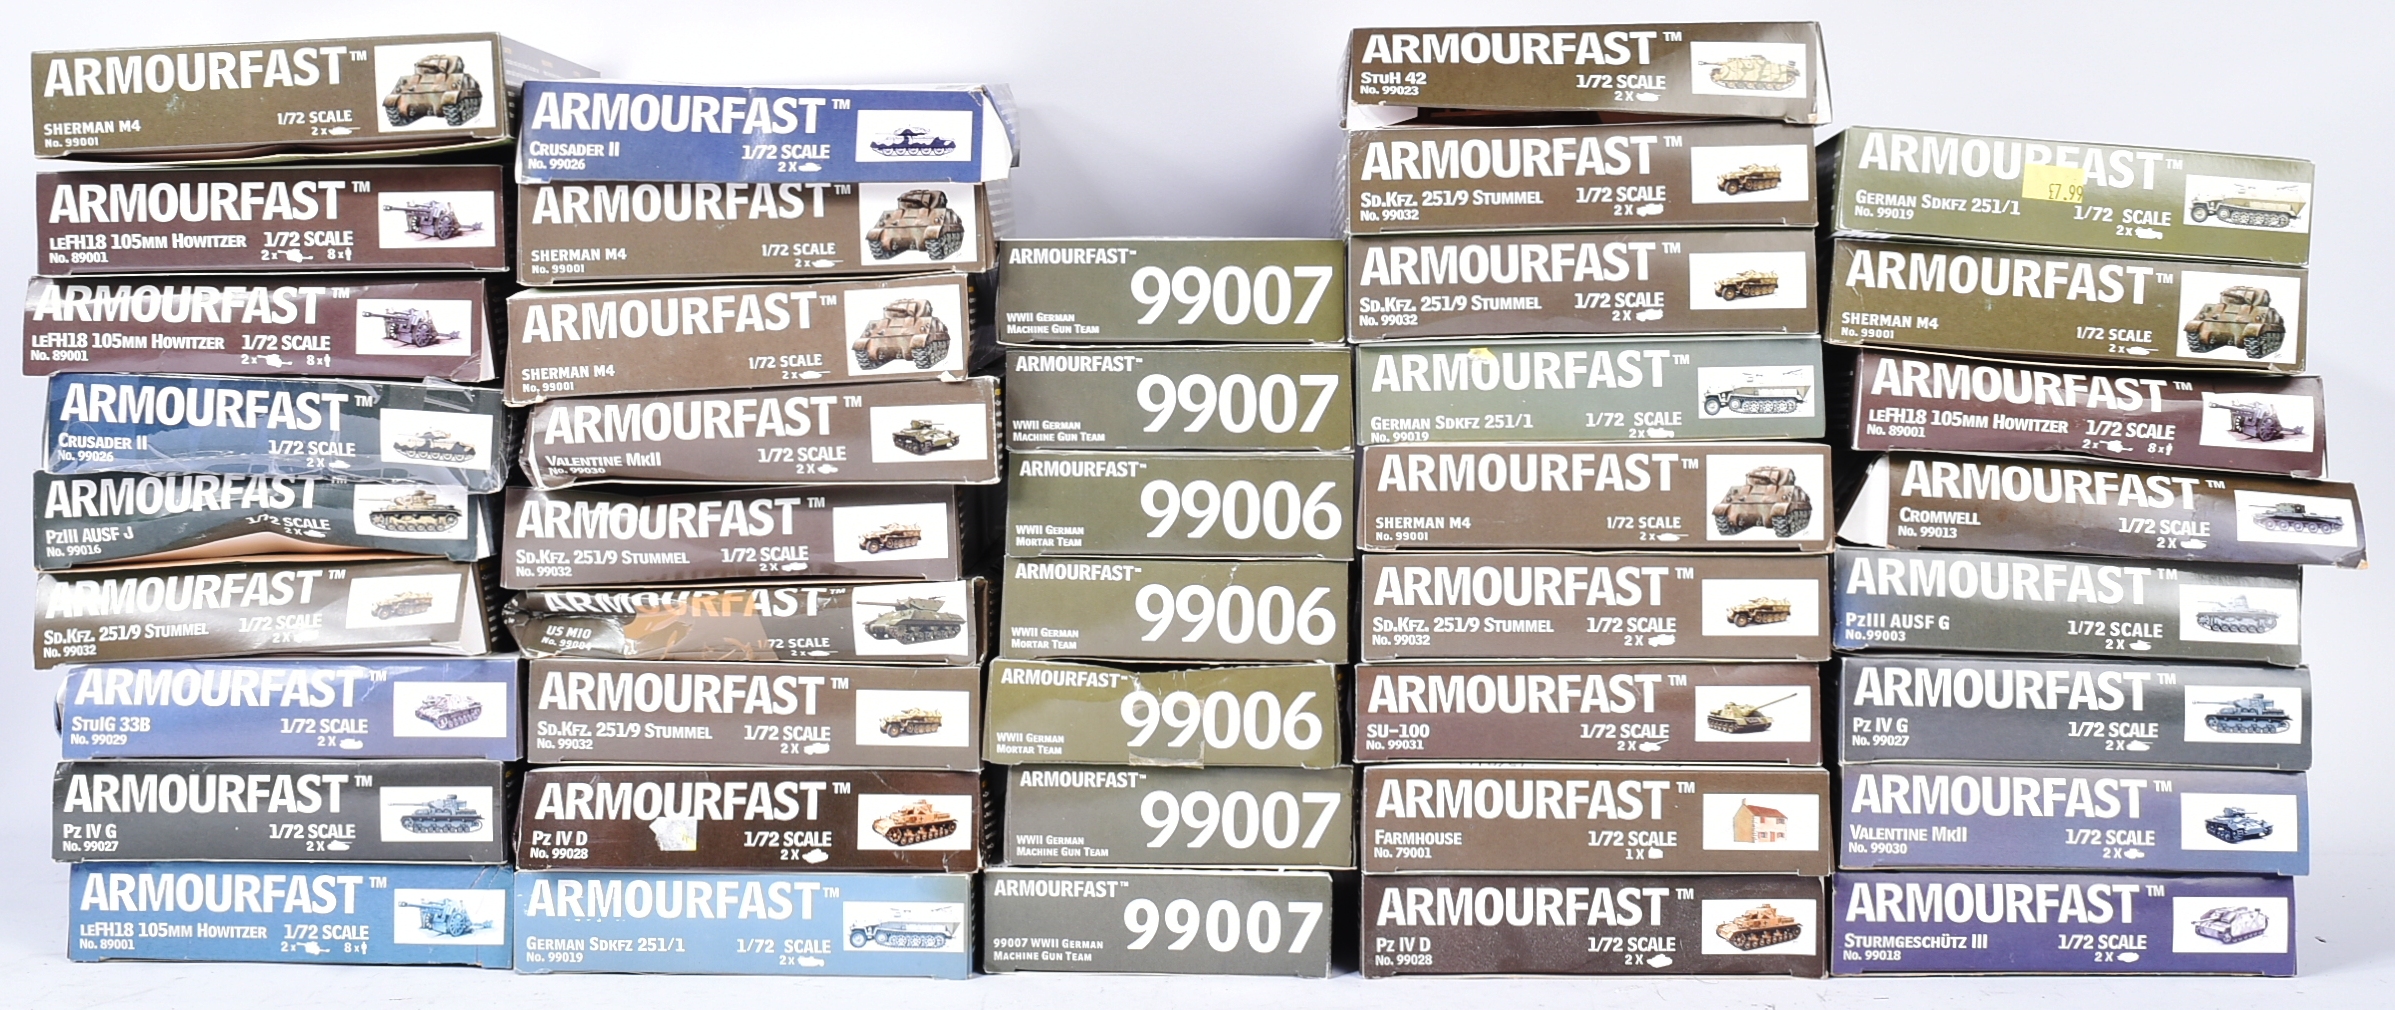 MODEL KITS - COLLECTION OF 1/72 SCALE ARMOURFAST MODEL KITS